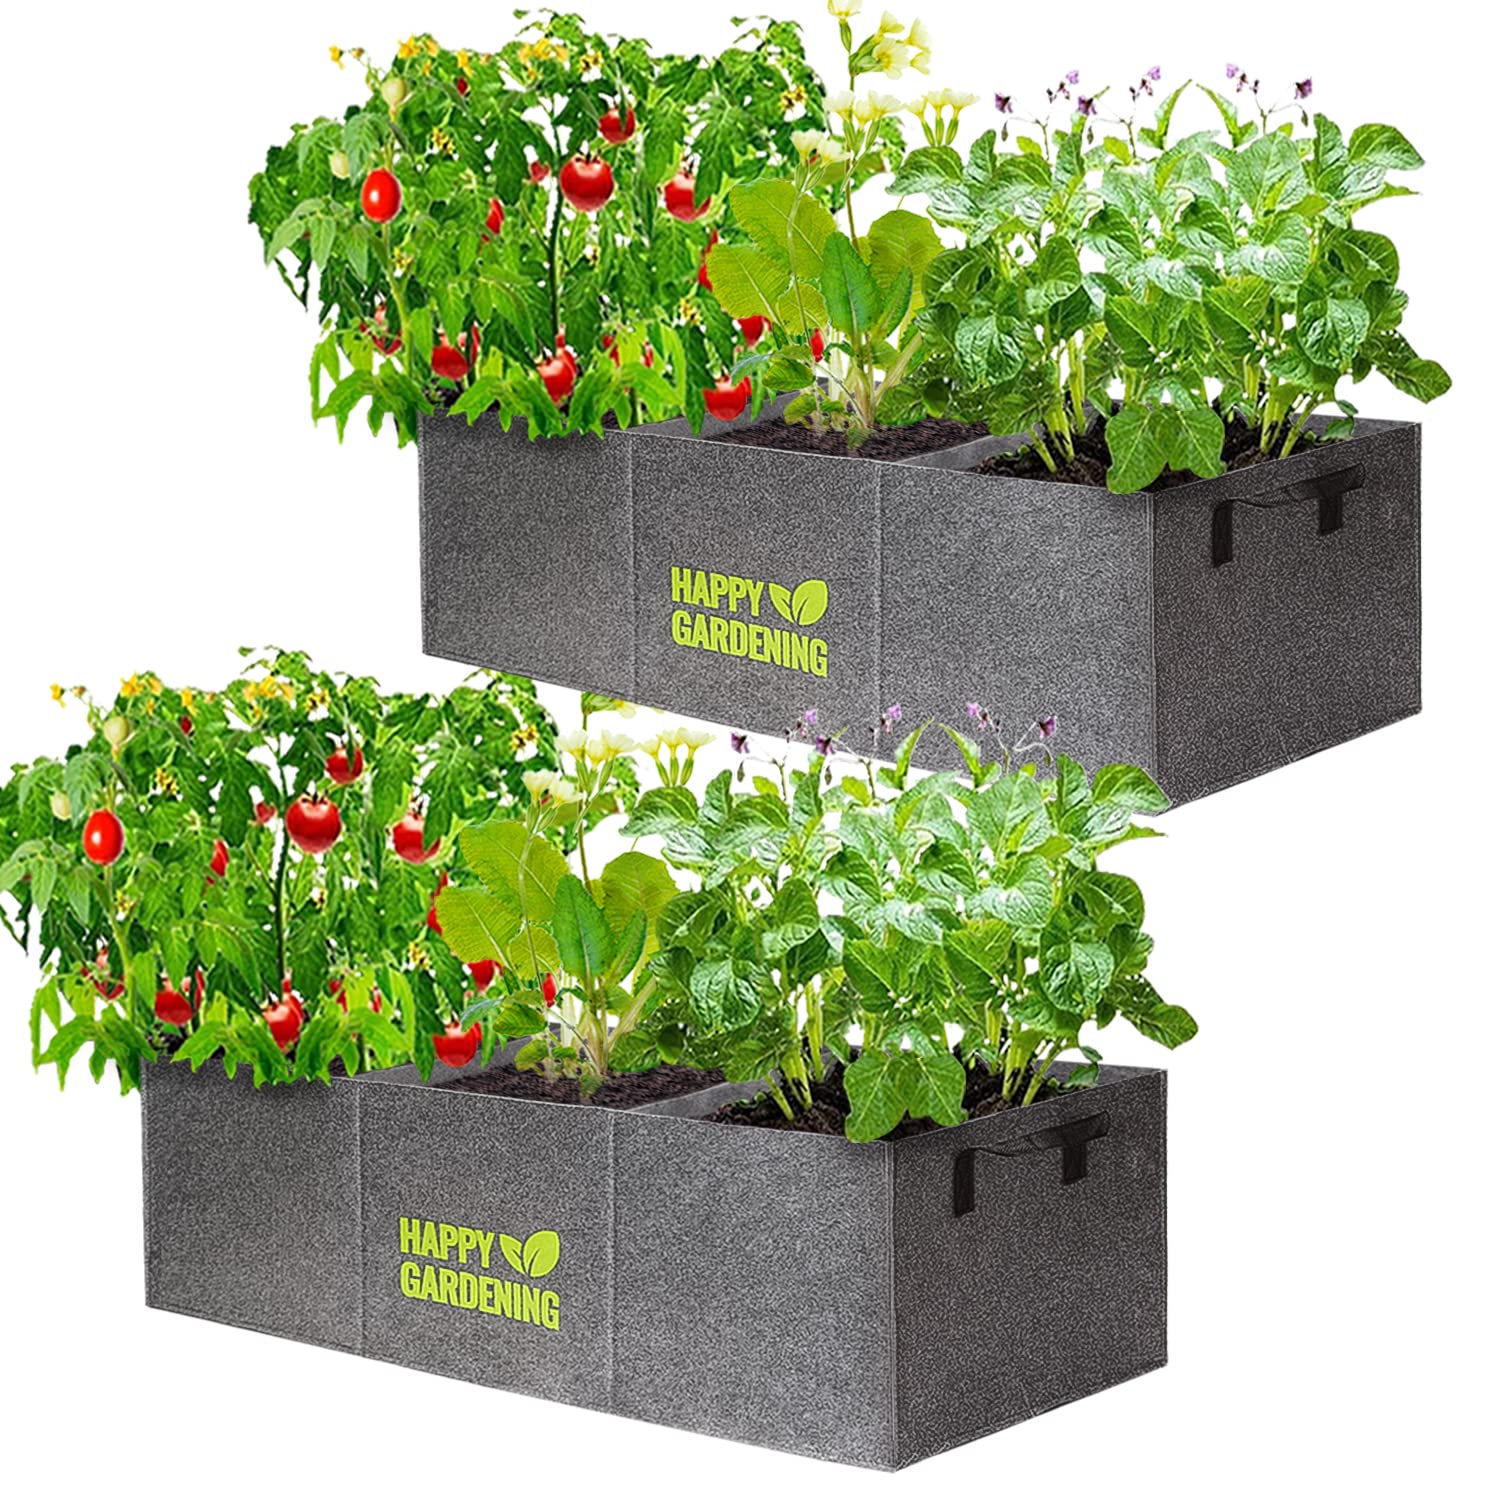 Non Woven Grow Bags Manufacturer in India - GreenPro Ventures